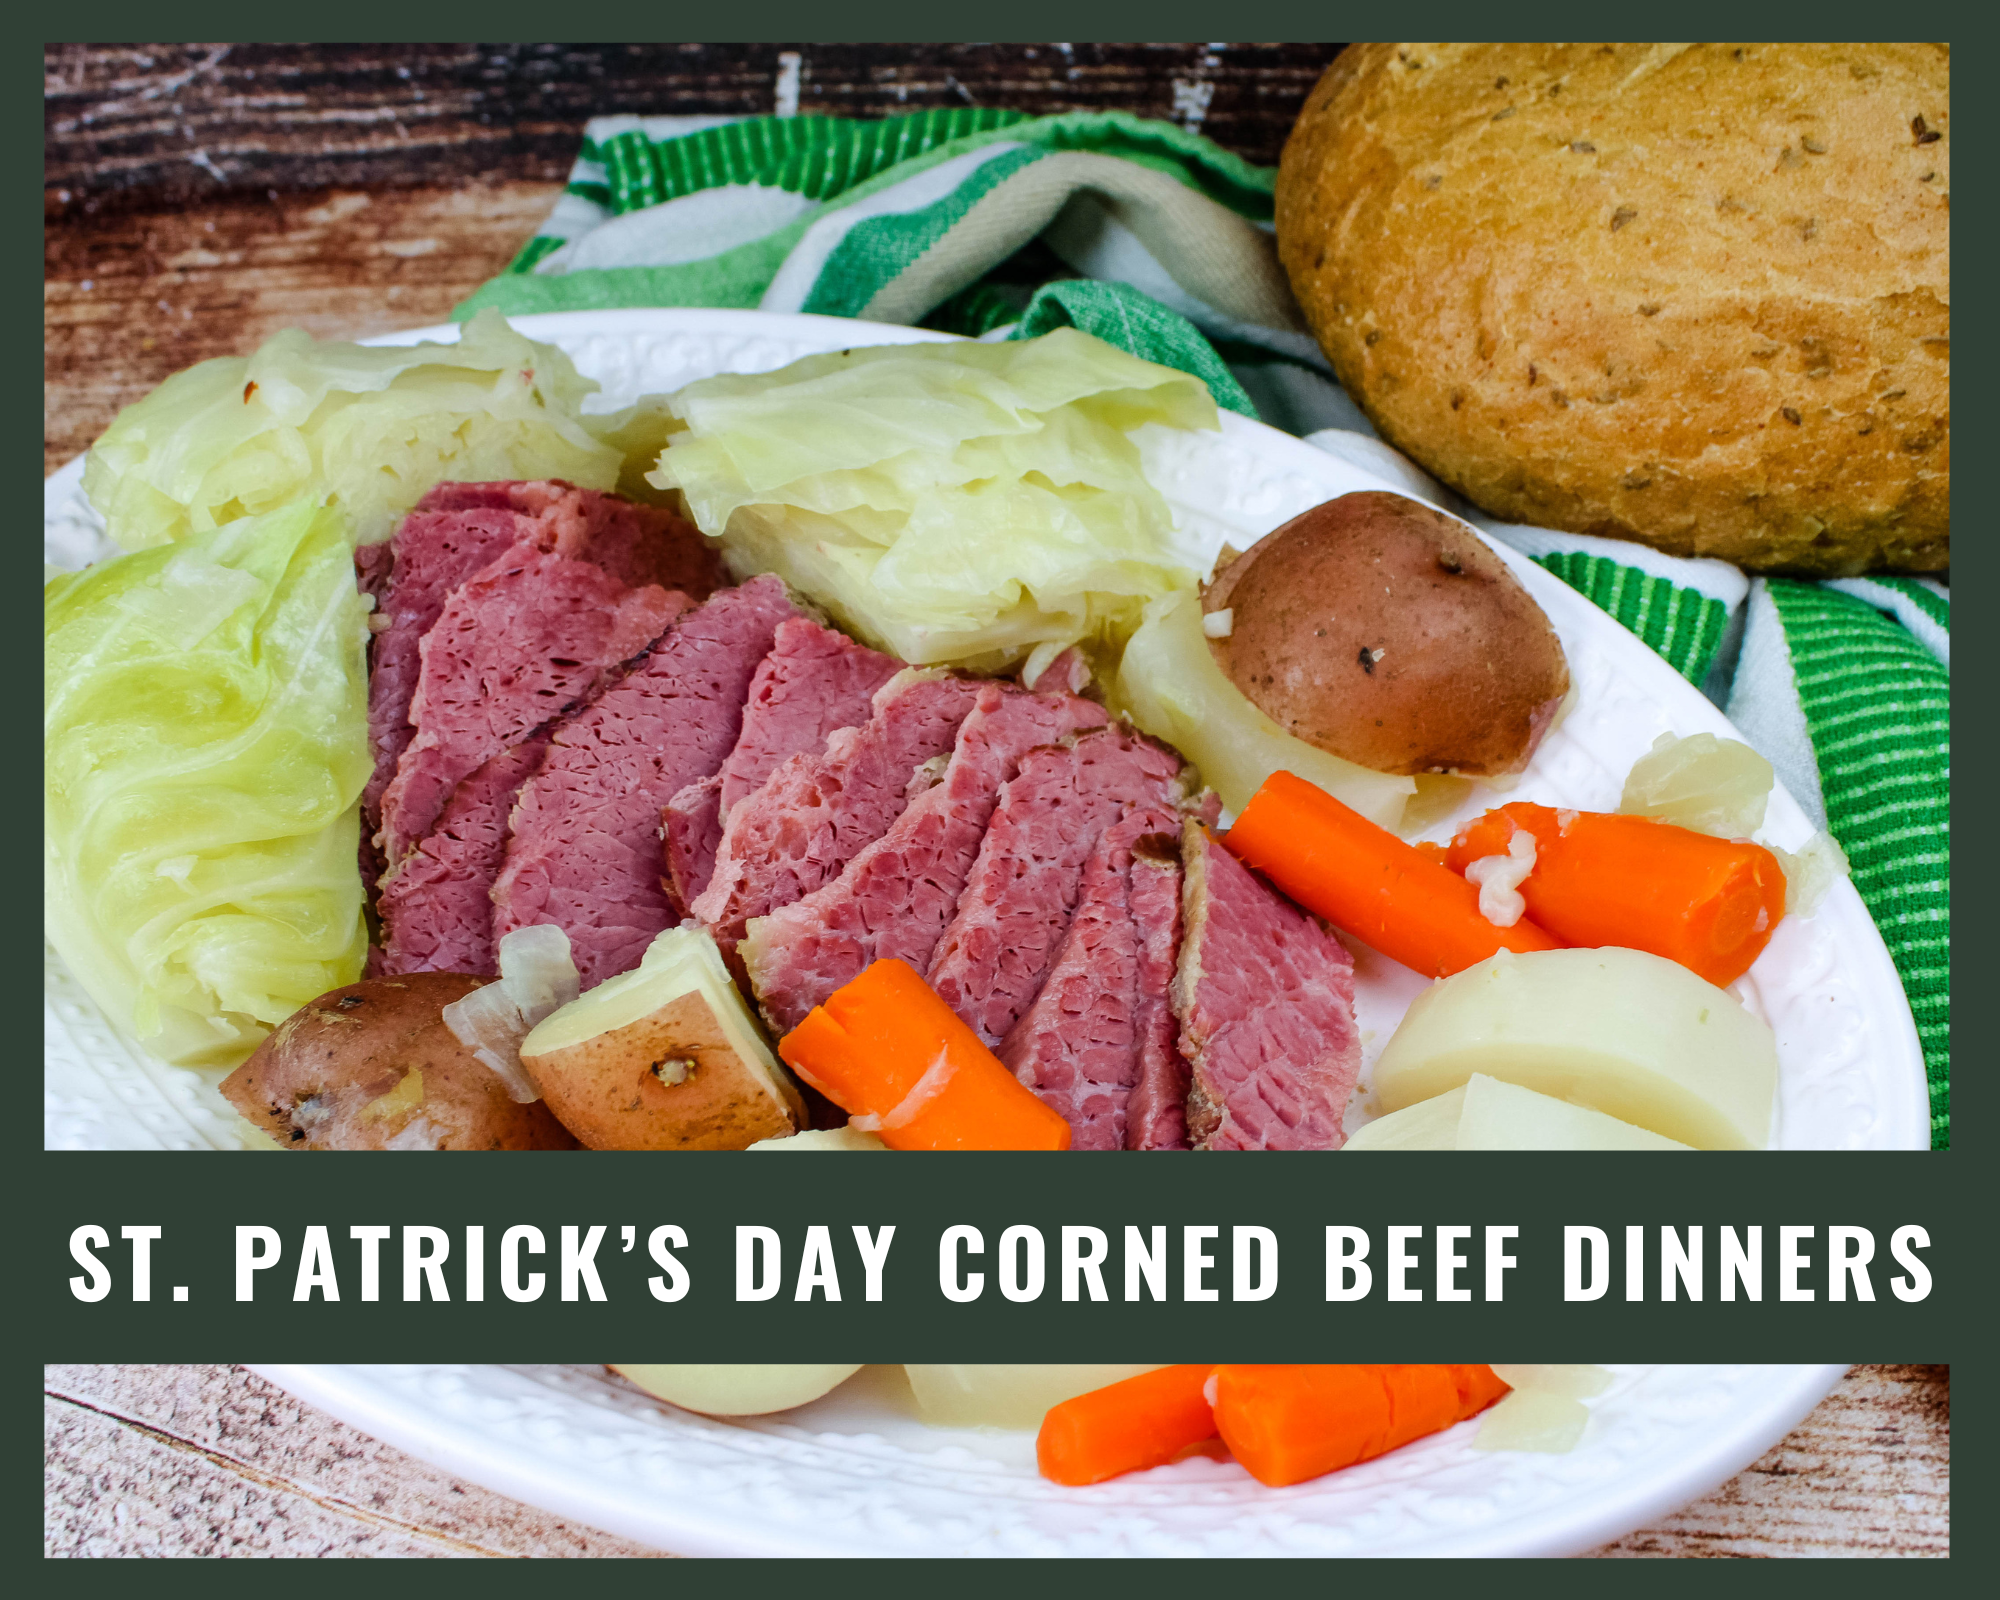 St. Patrick’s Day Corned Beef Dinners